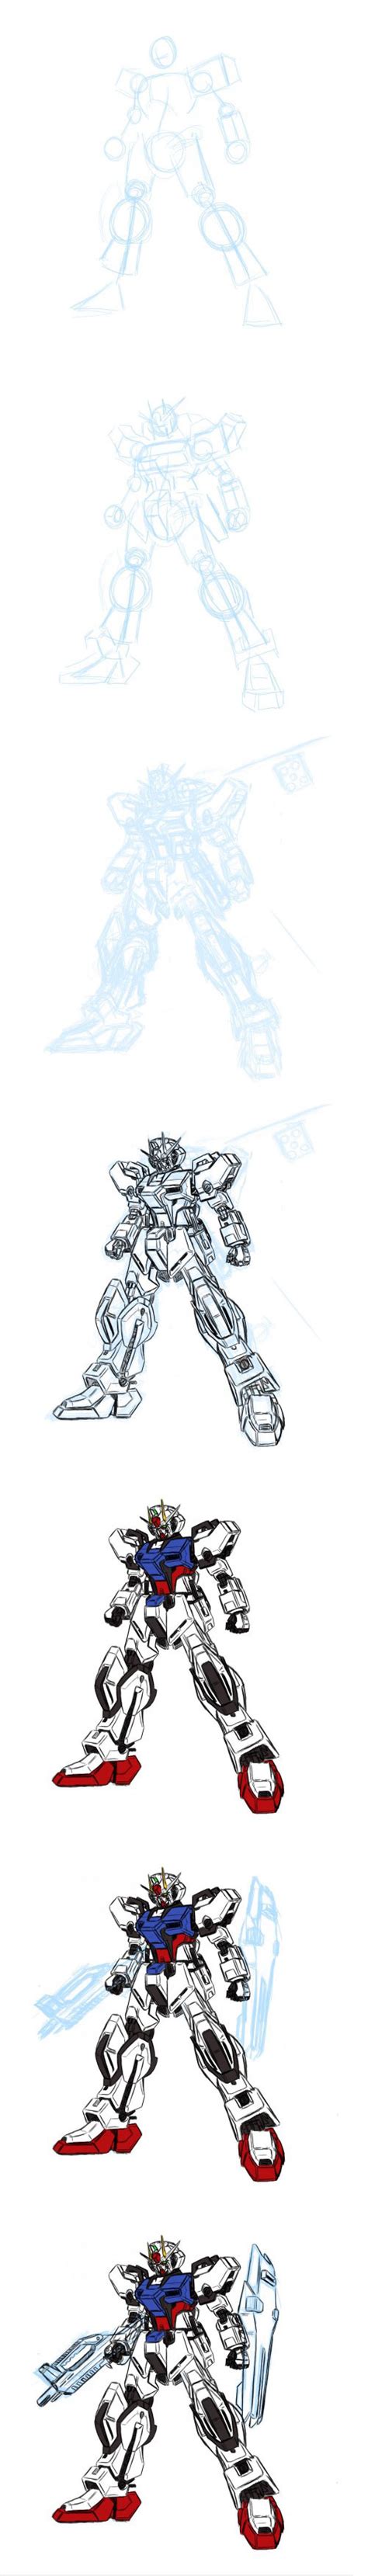 How To Draw A Gundam Step By Step Mechanical Design Design Reference